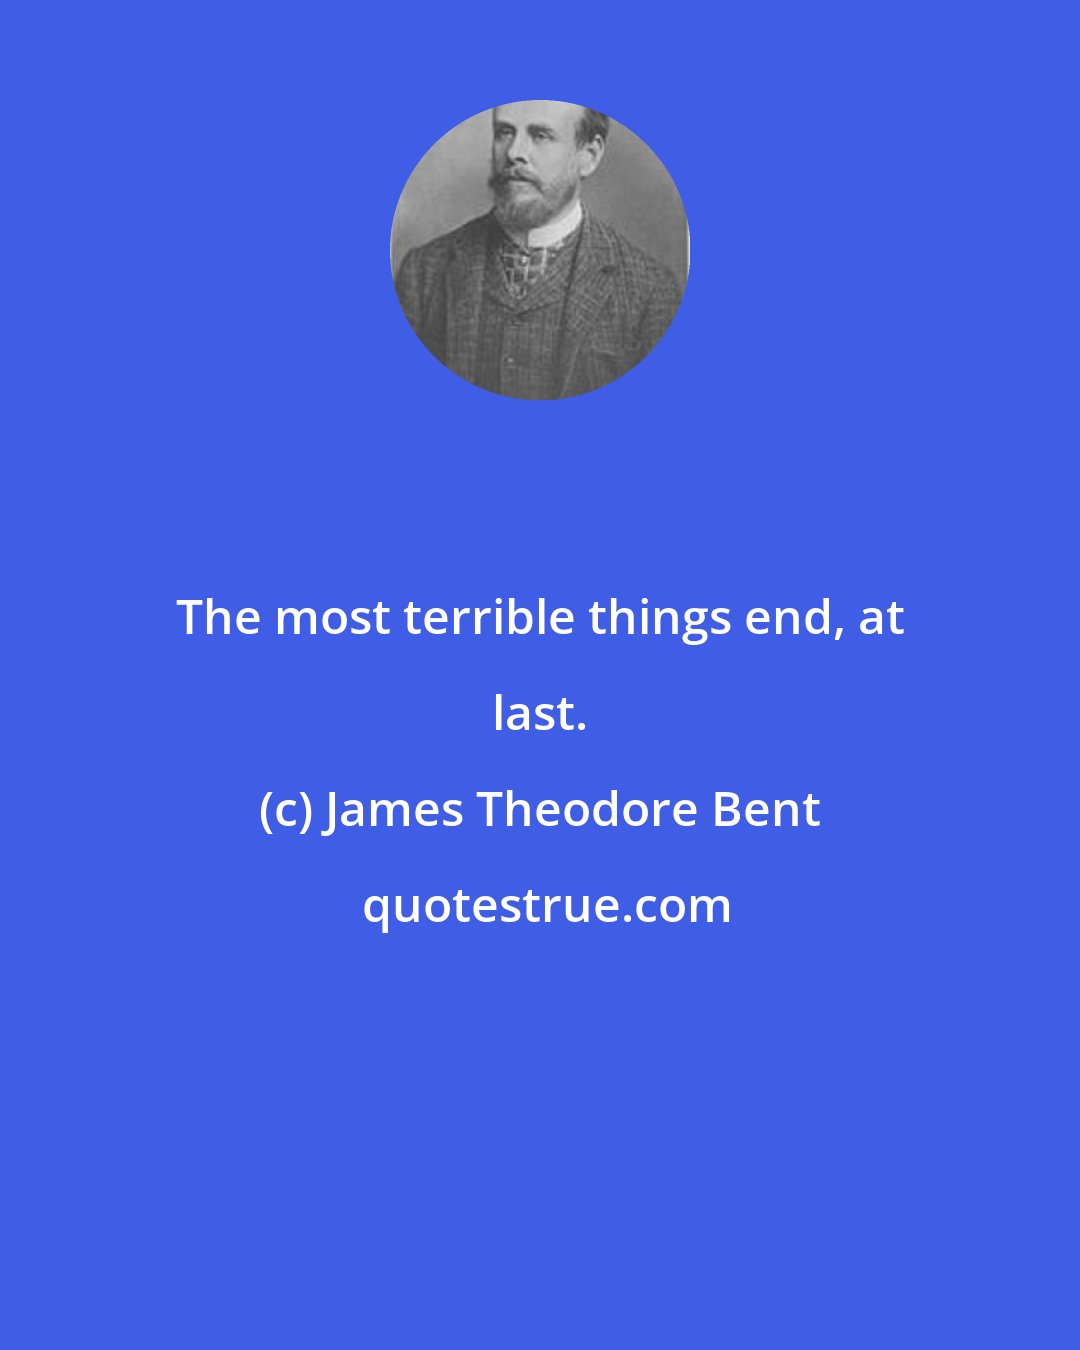 James Theodore Bent: The most terrible things end, at last.